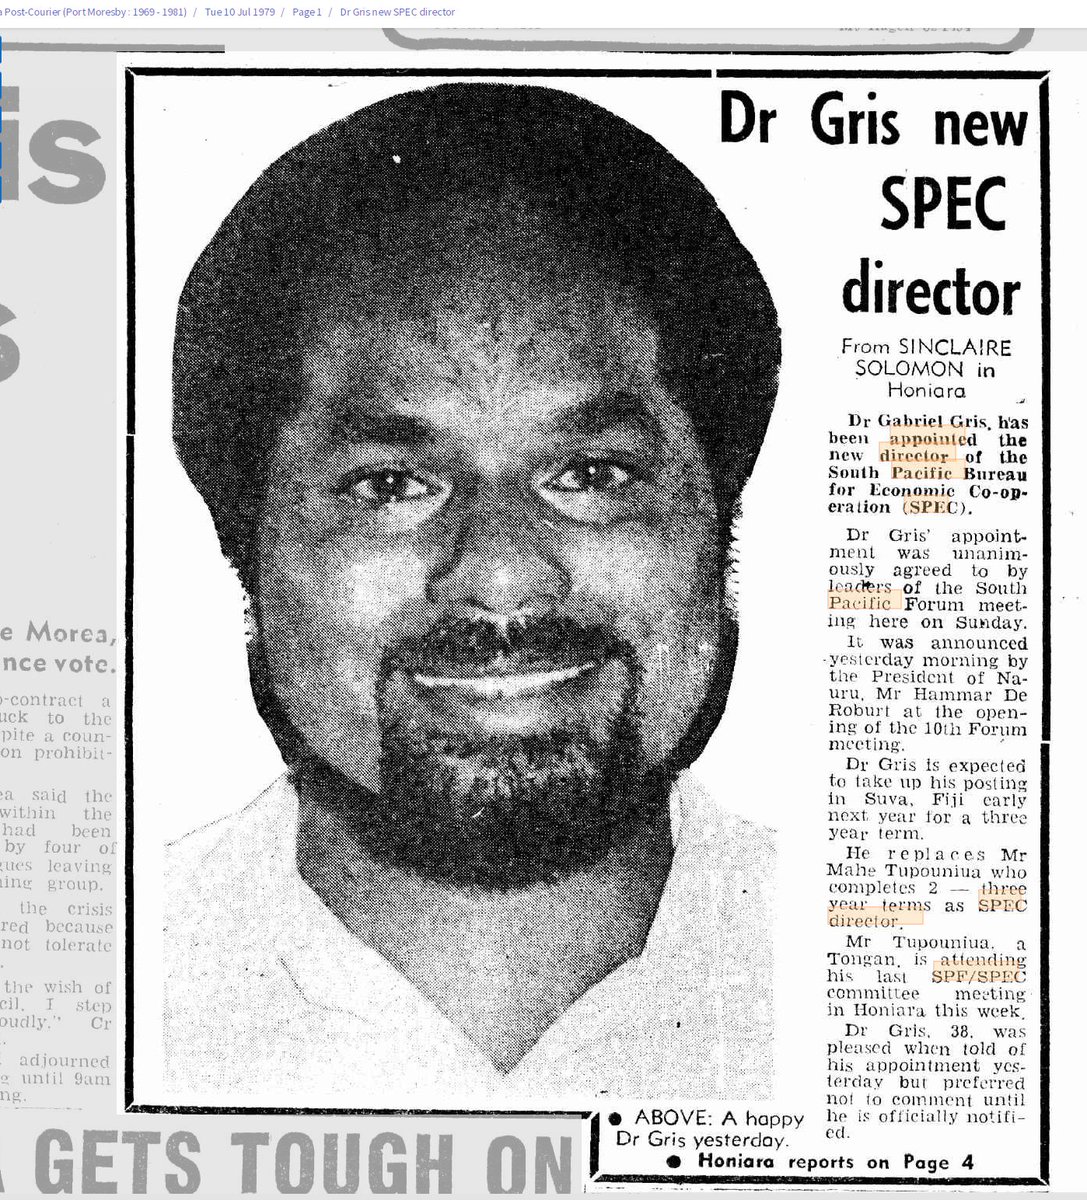 4. In 1979 ... the unanimous appointment of PNG's Dr Gabriel Gris as director of SPEC (South Pacific Bureau for Economic Co-operation), predecessor to PIF. (Front page of the  #PNG  @Post_Courier in 10 July 1979).